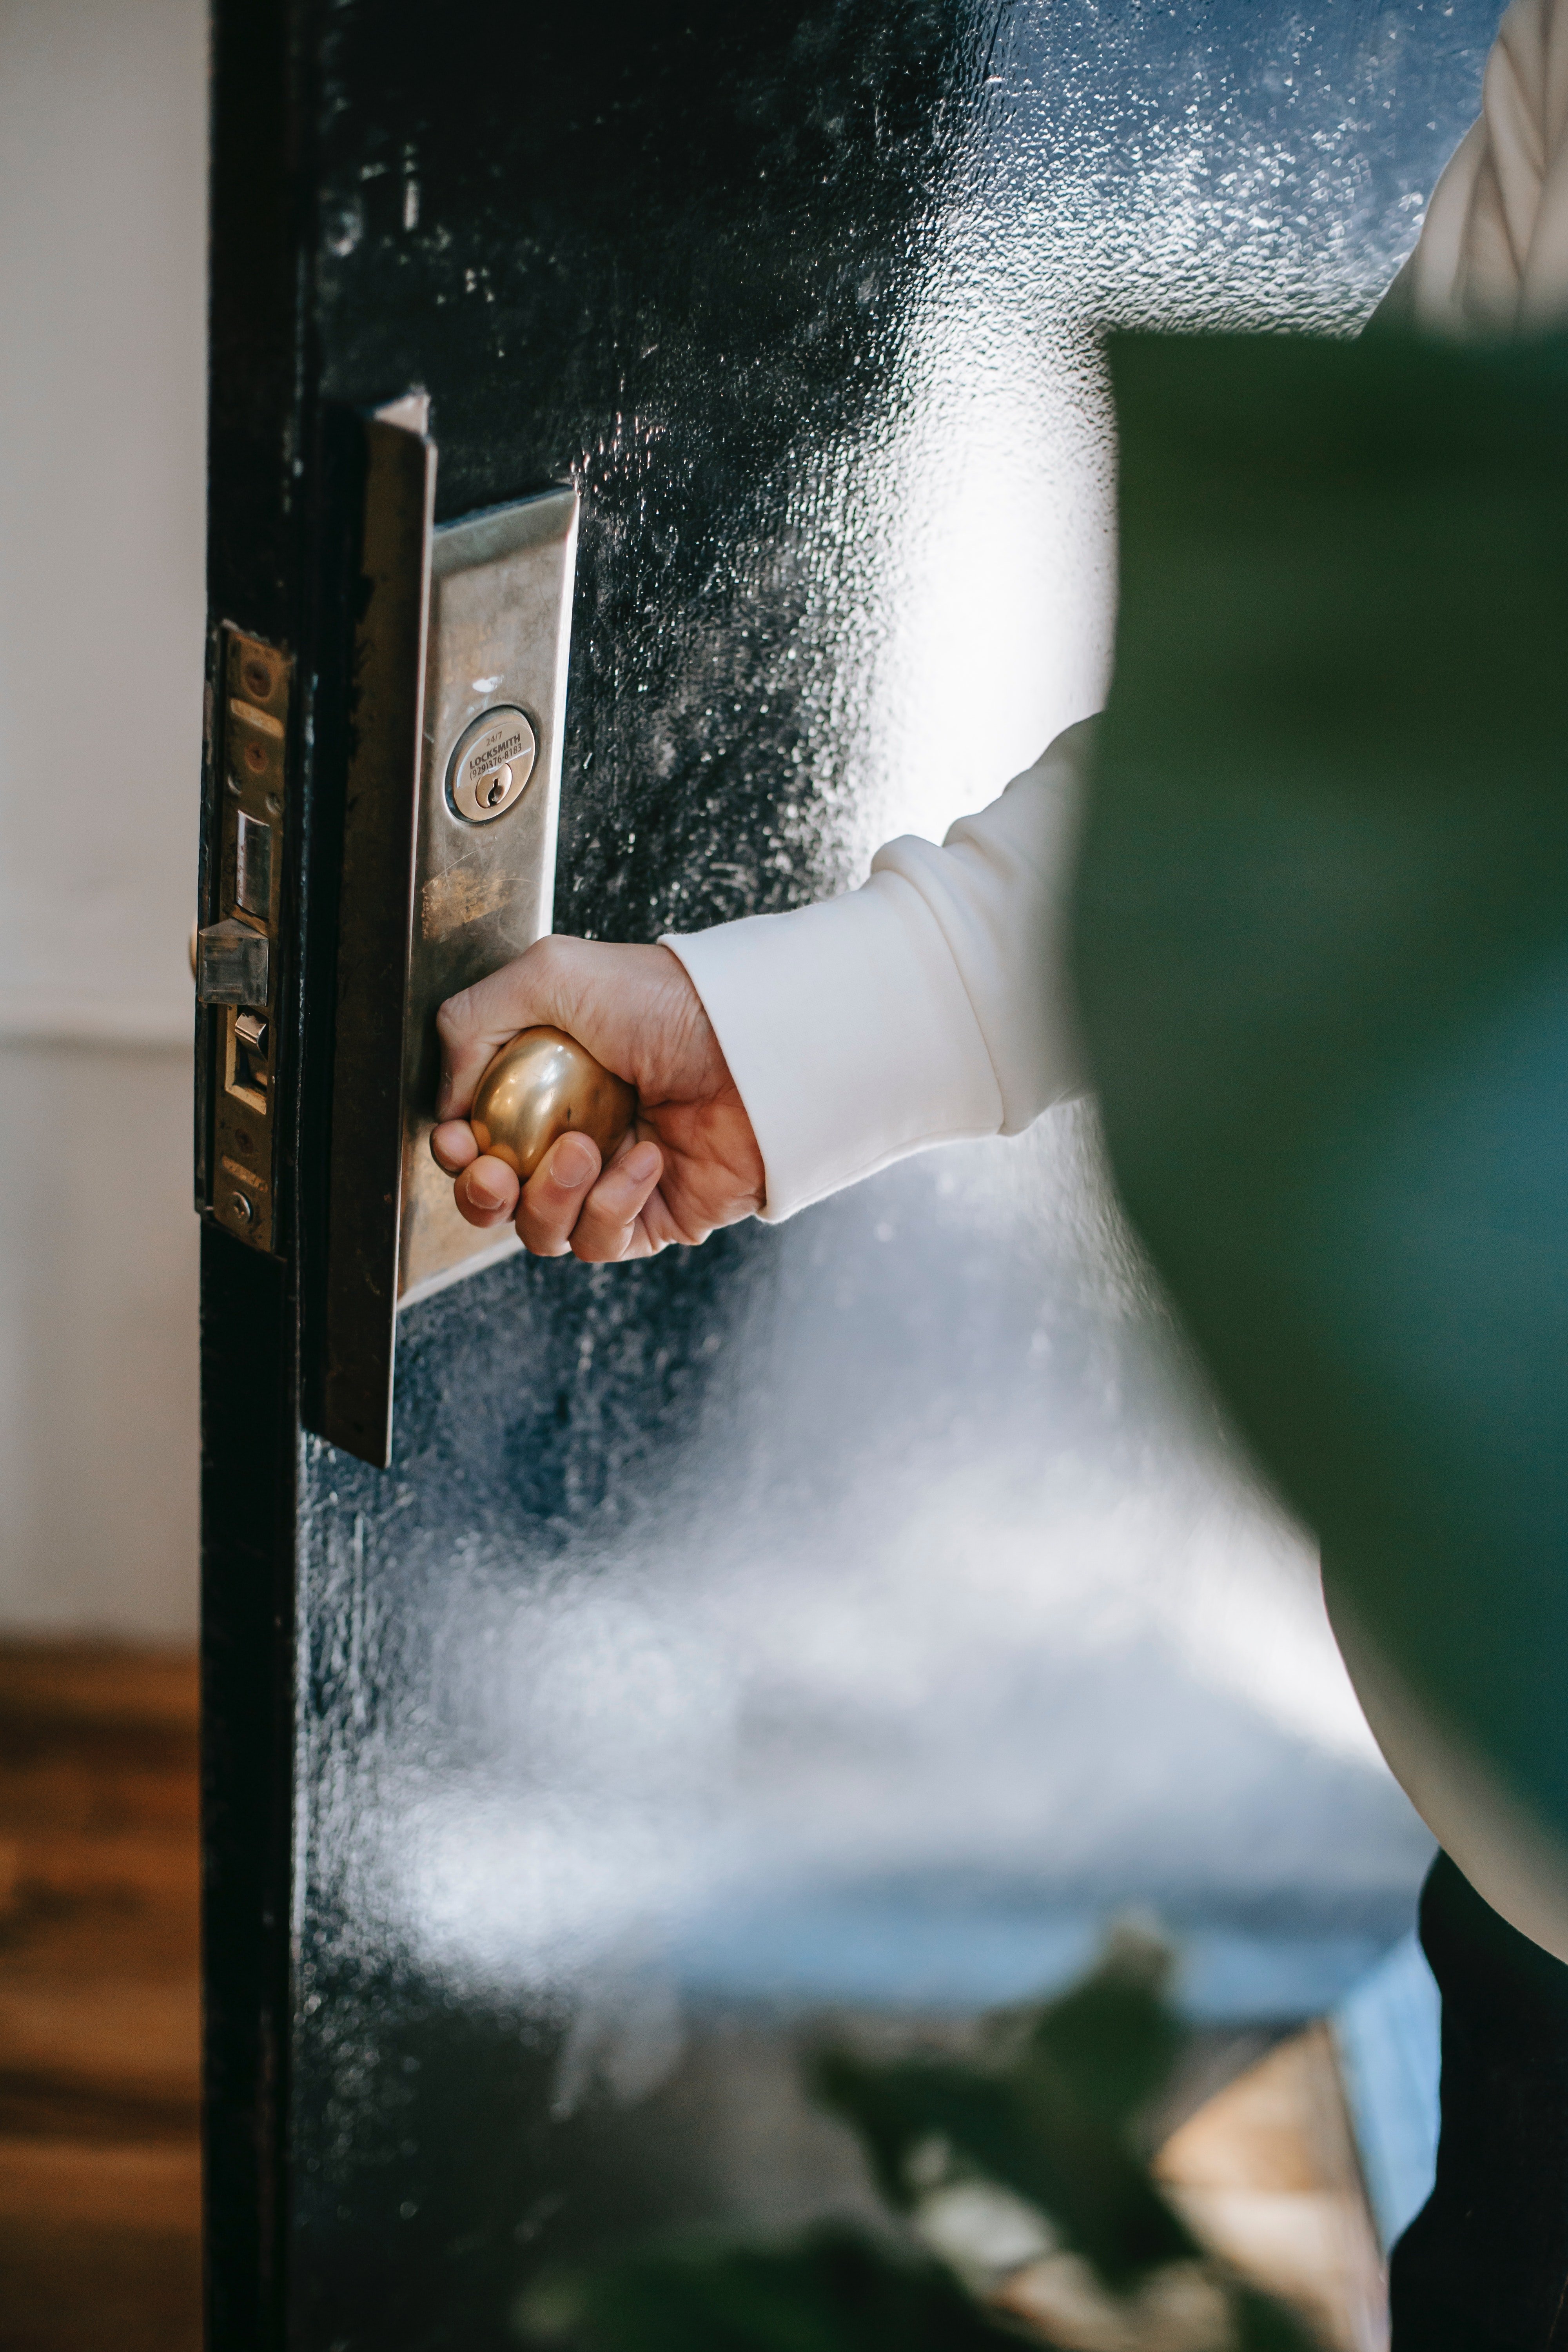 Max started locking the door to his room. | Photo: Pexels